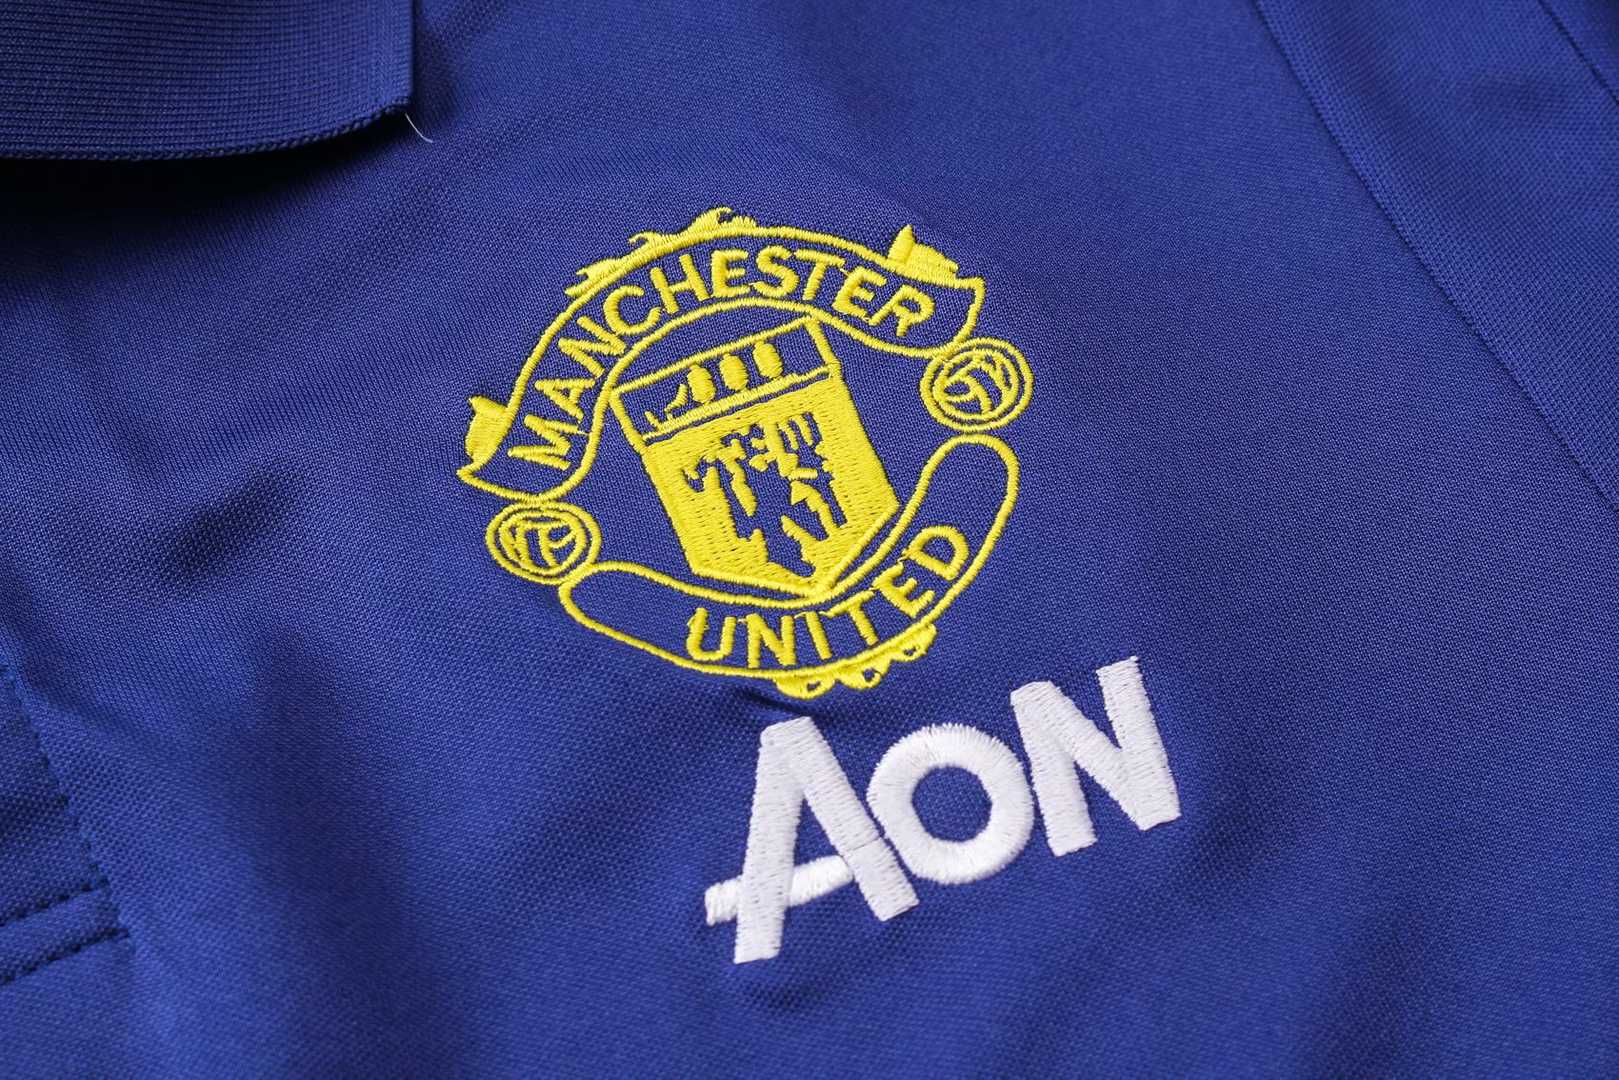 2019/20 Manchester United Blue Mens Soccer Polo Jersey